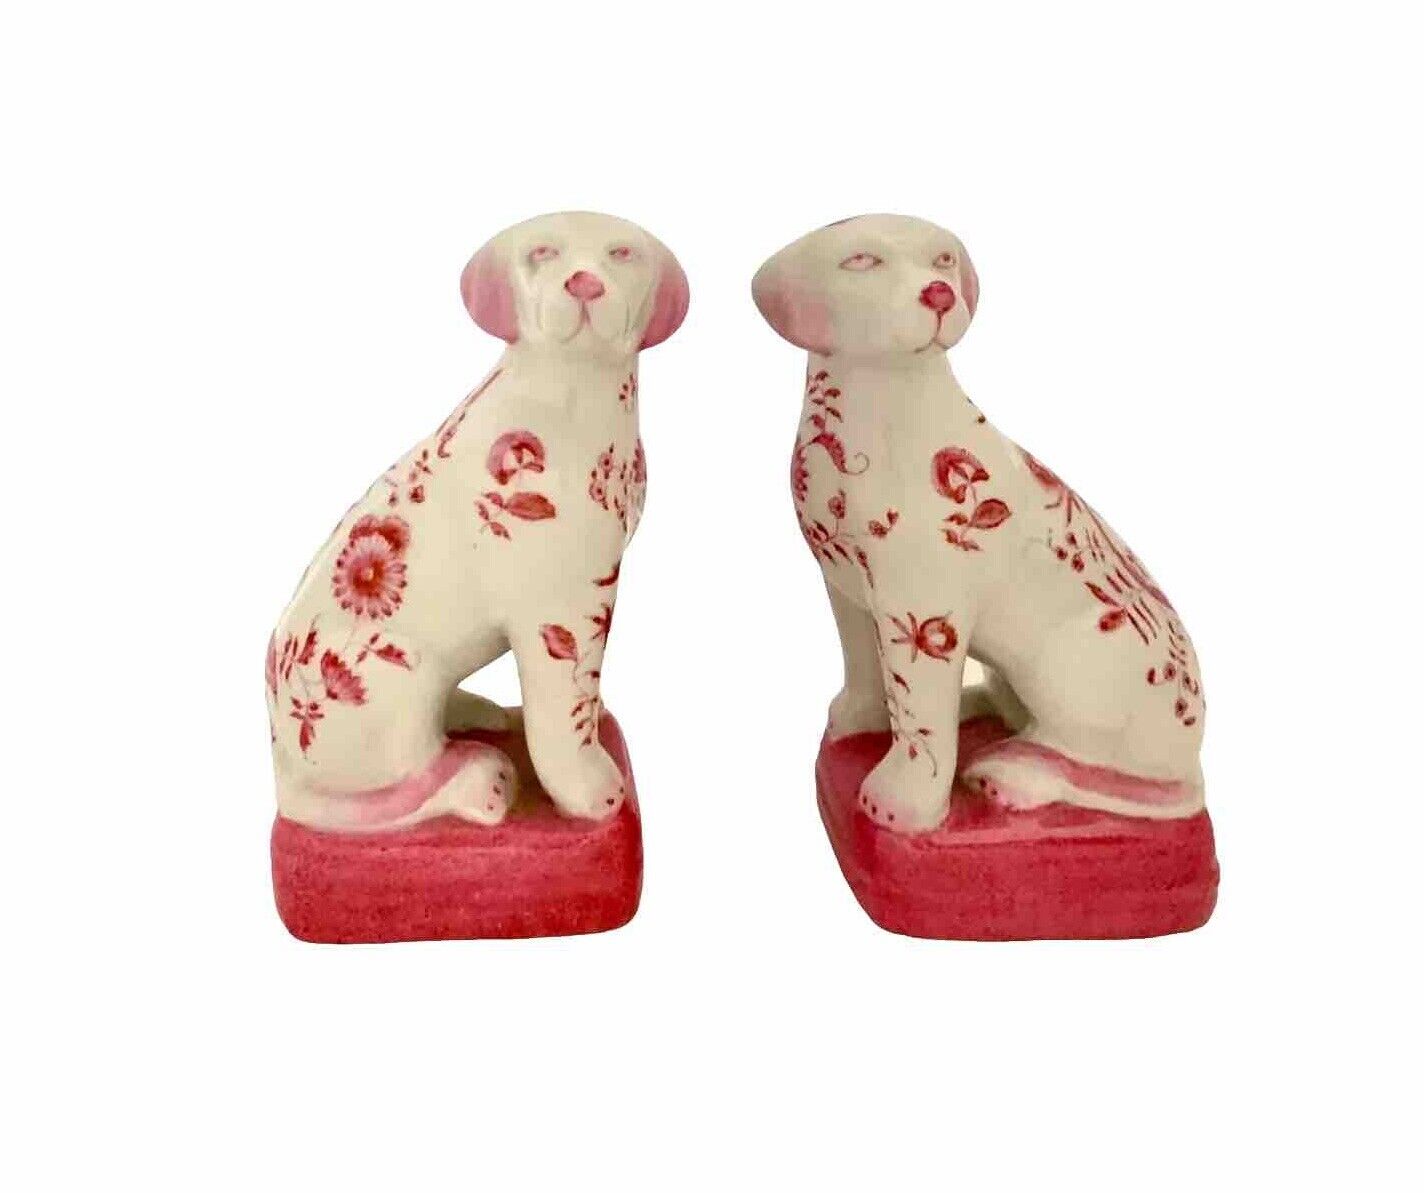 Dog Statue Pair Rare Pink Stamped Oriental Chinoiserie Vintage Decor Gift